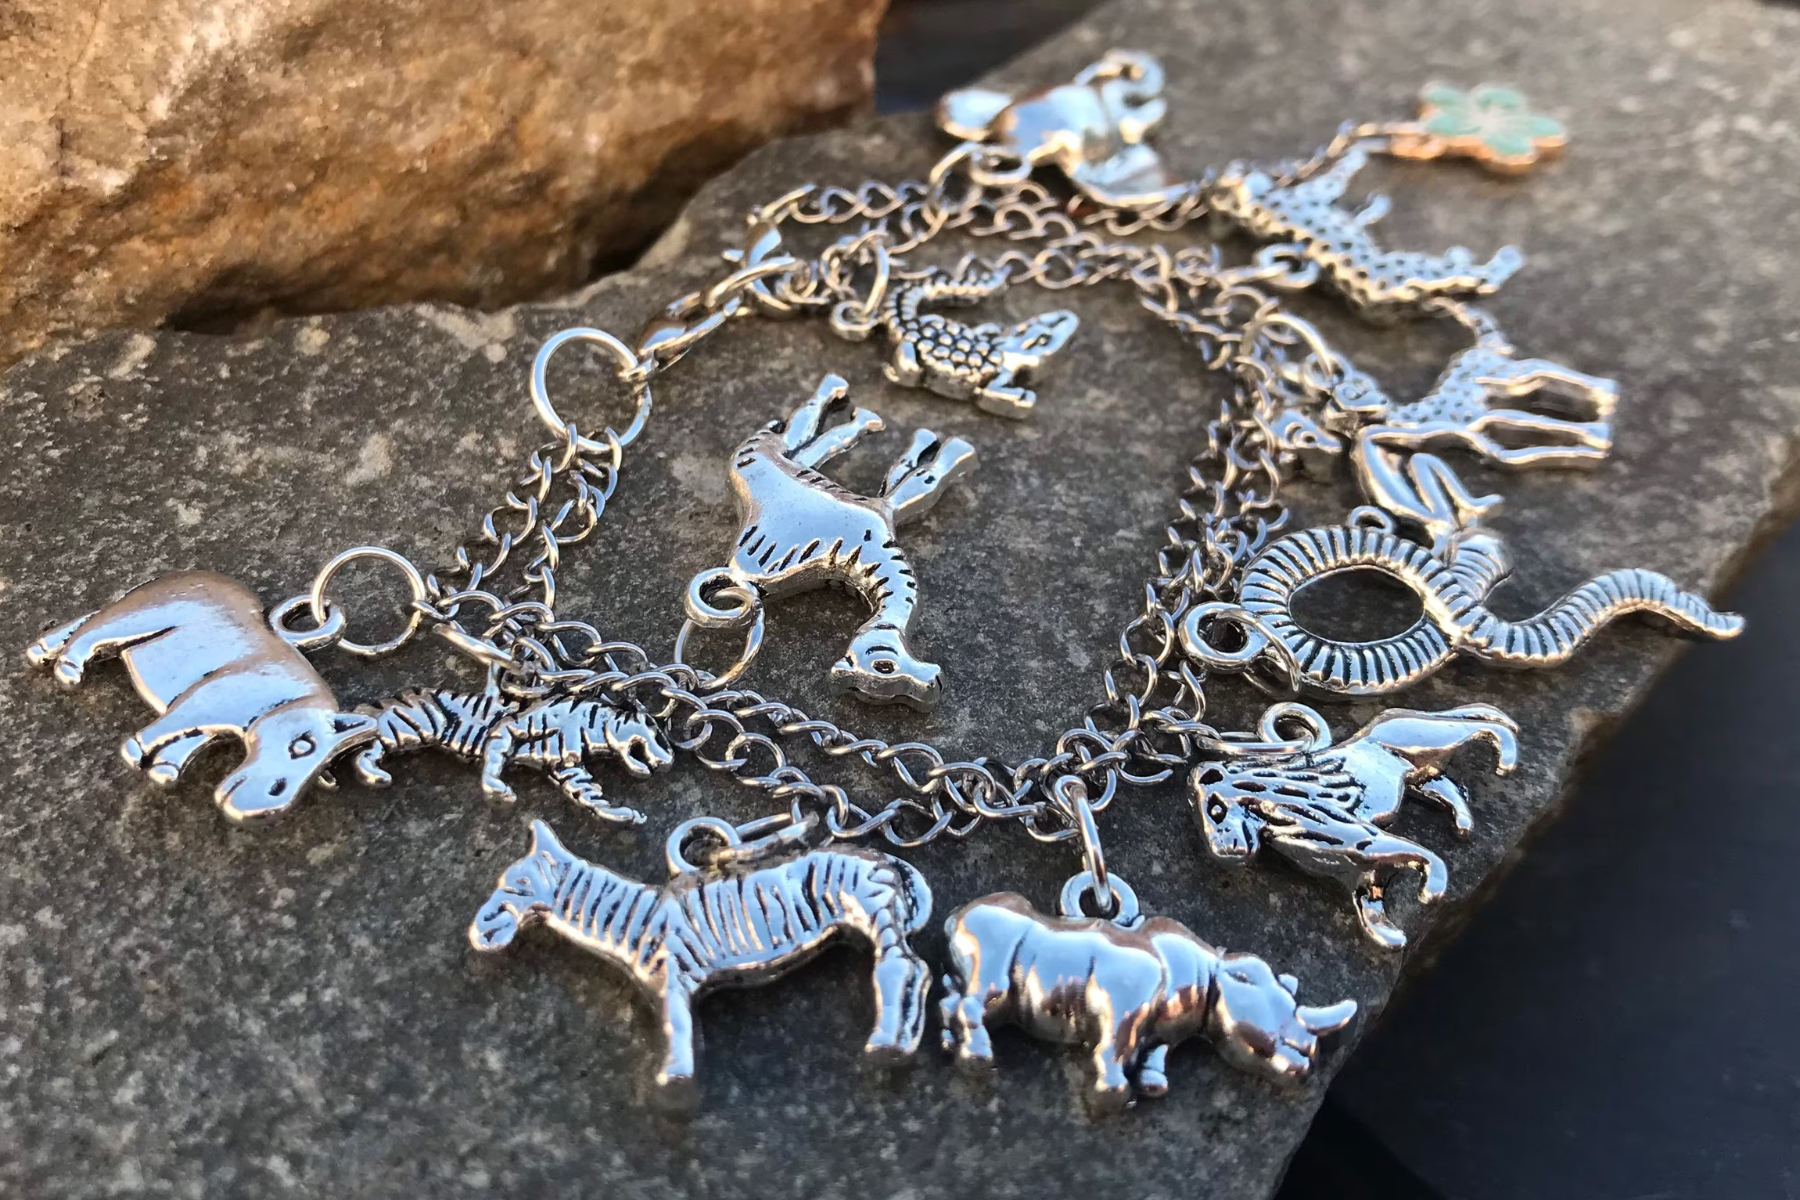 A bracelet with various animal designs